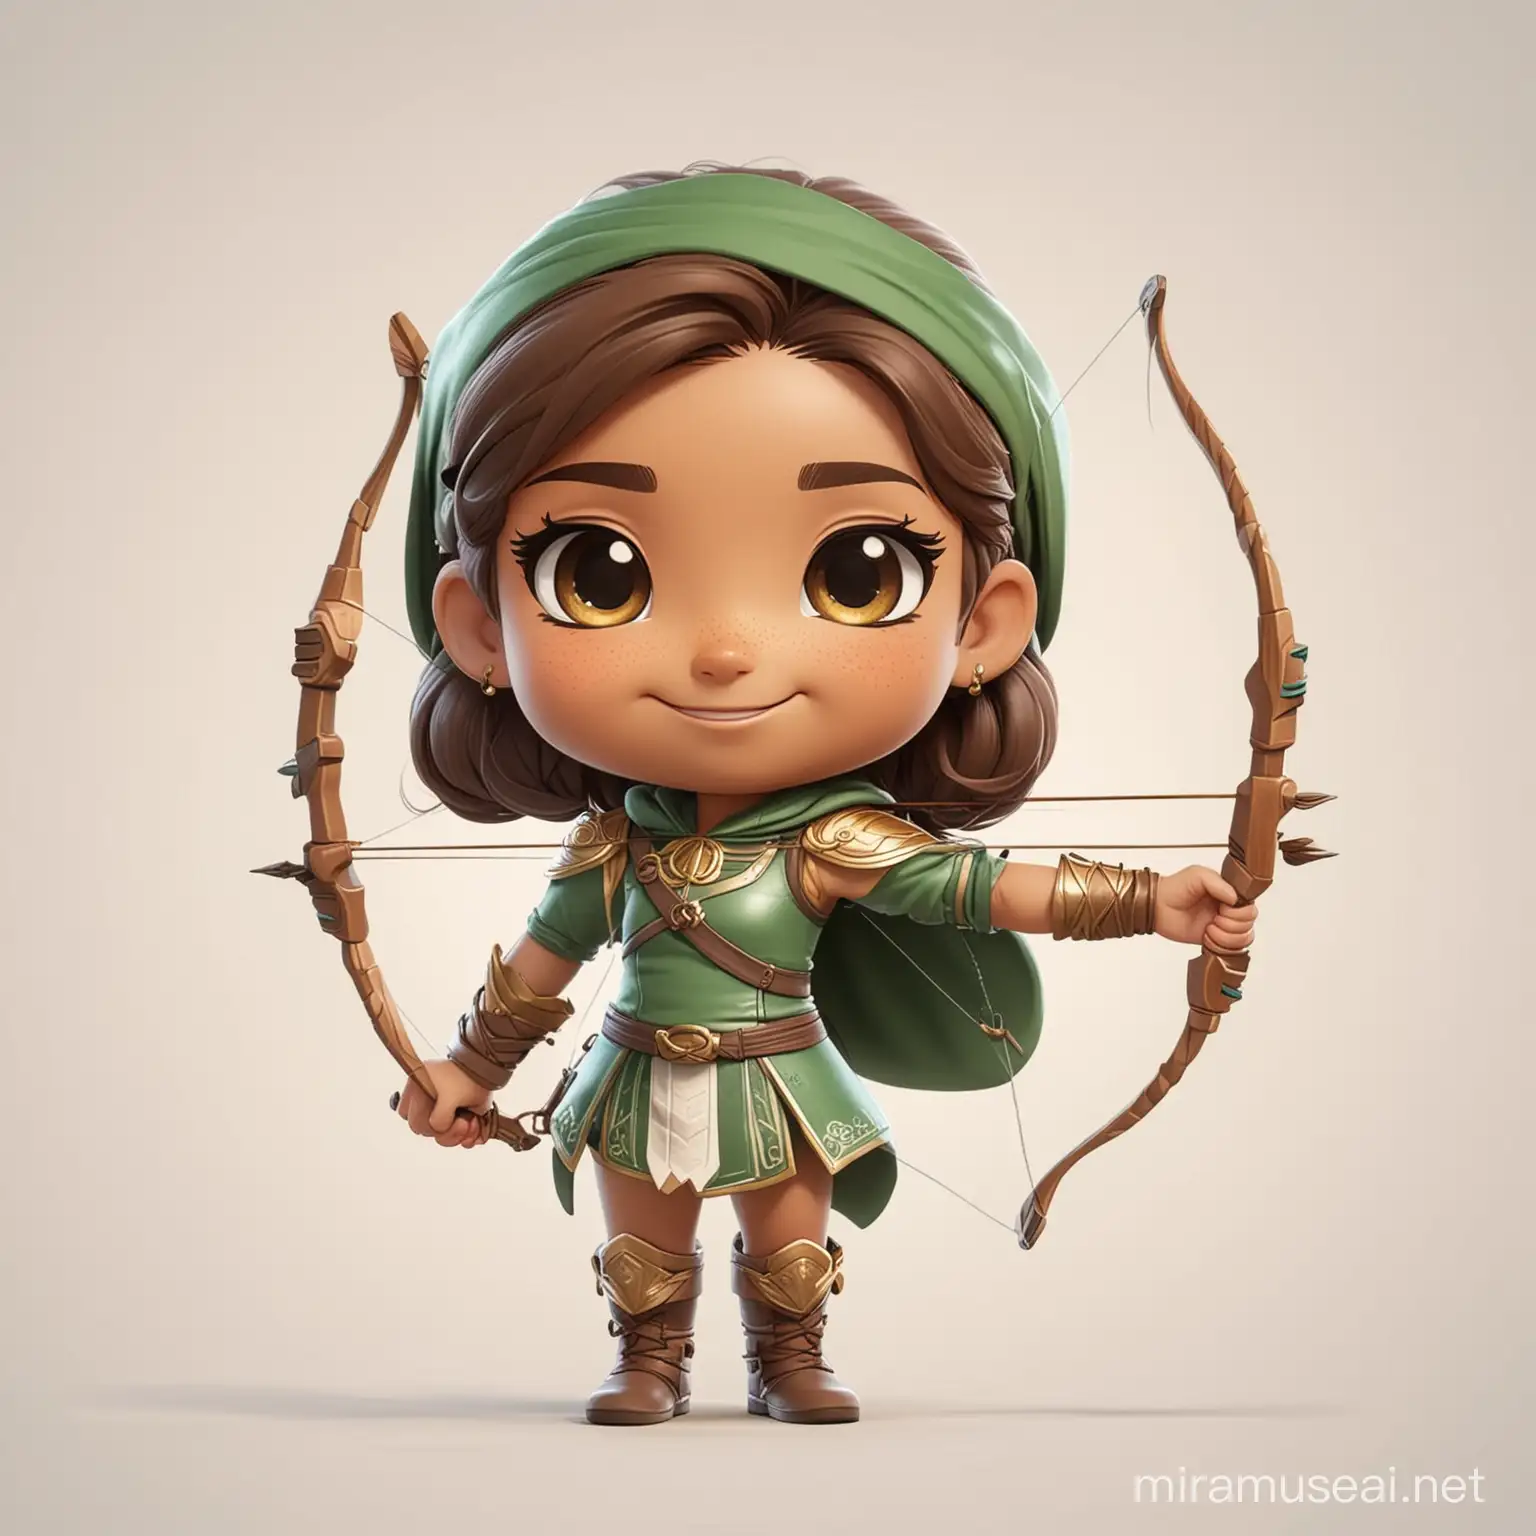 ChibiStyle Female Child Archer with Medium Brown Skin in Green Outfit